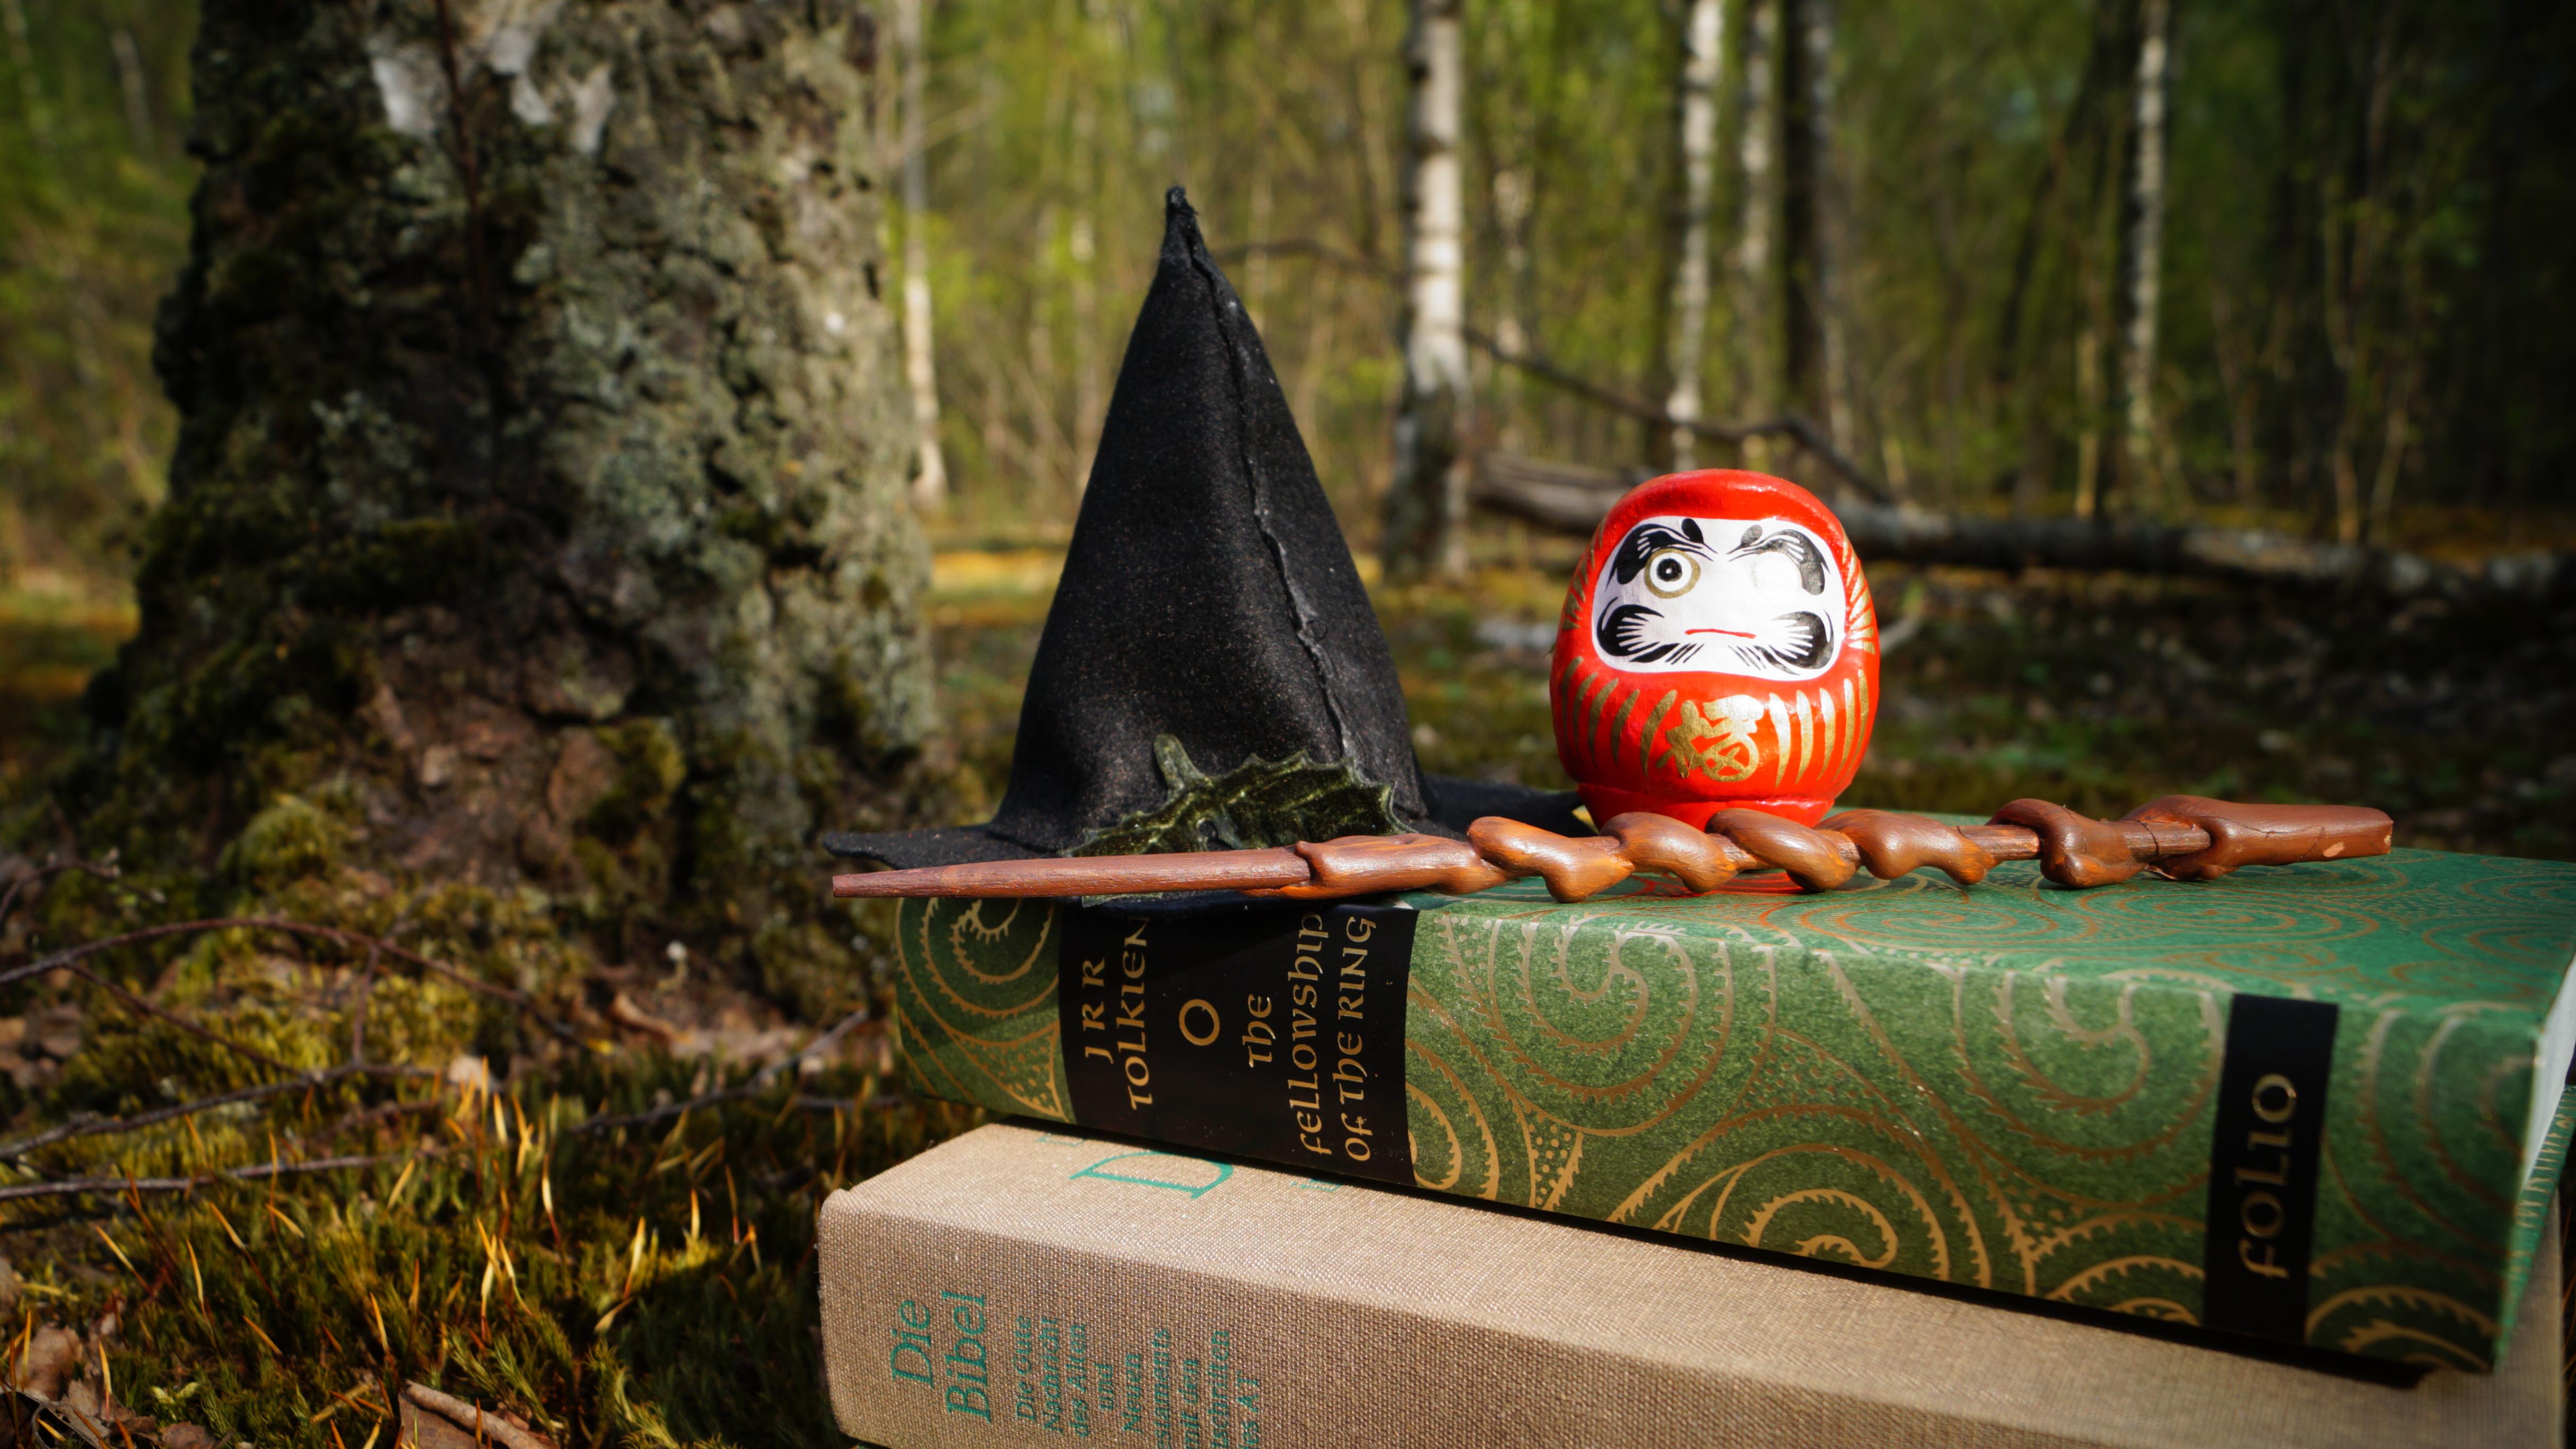 The Bible and Tolkien's "The Fellowship of the Ring" are stacked on top of each other on a mossy forest floor. On top of the Tolkien book are placed: a small, conical, black witch's hat, a magical wand and a small, red Japanese Daruma doll with one eye painted on. Several trees are visible behind the books.. 